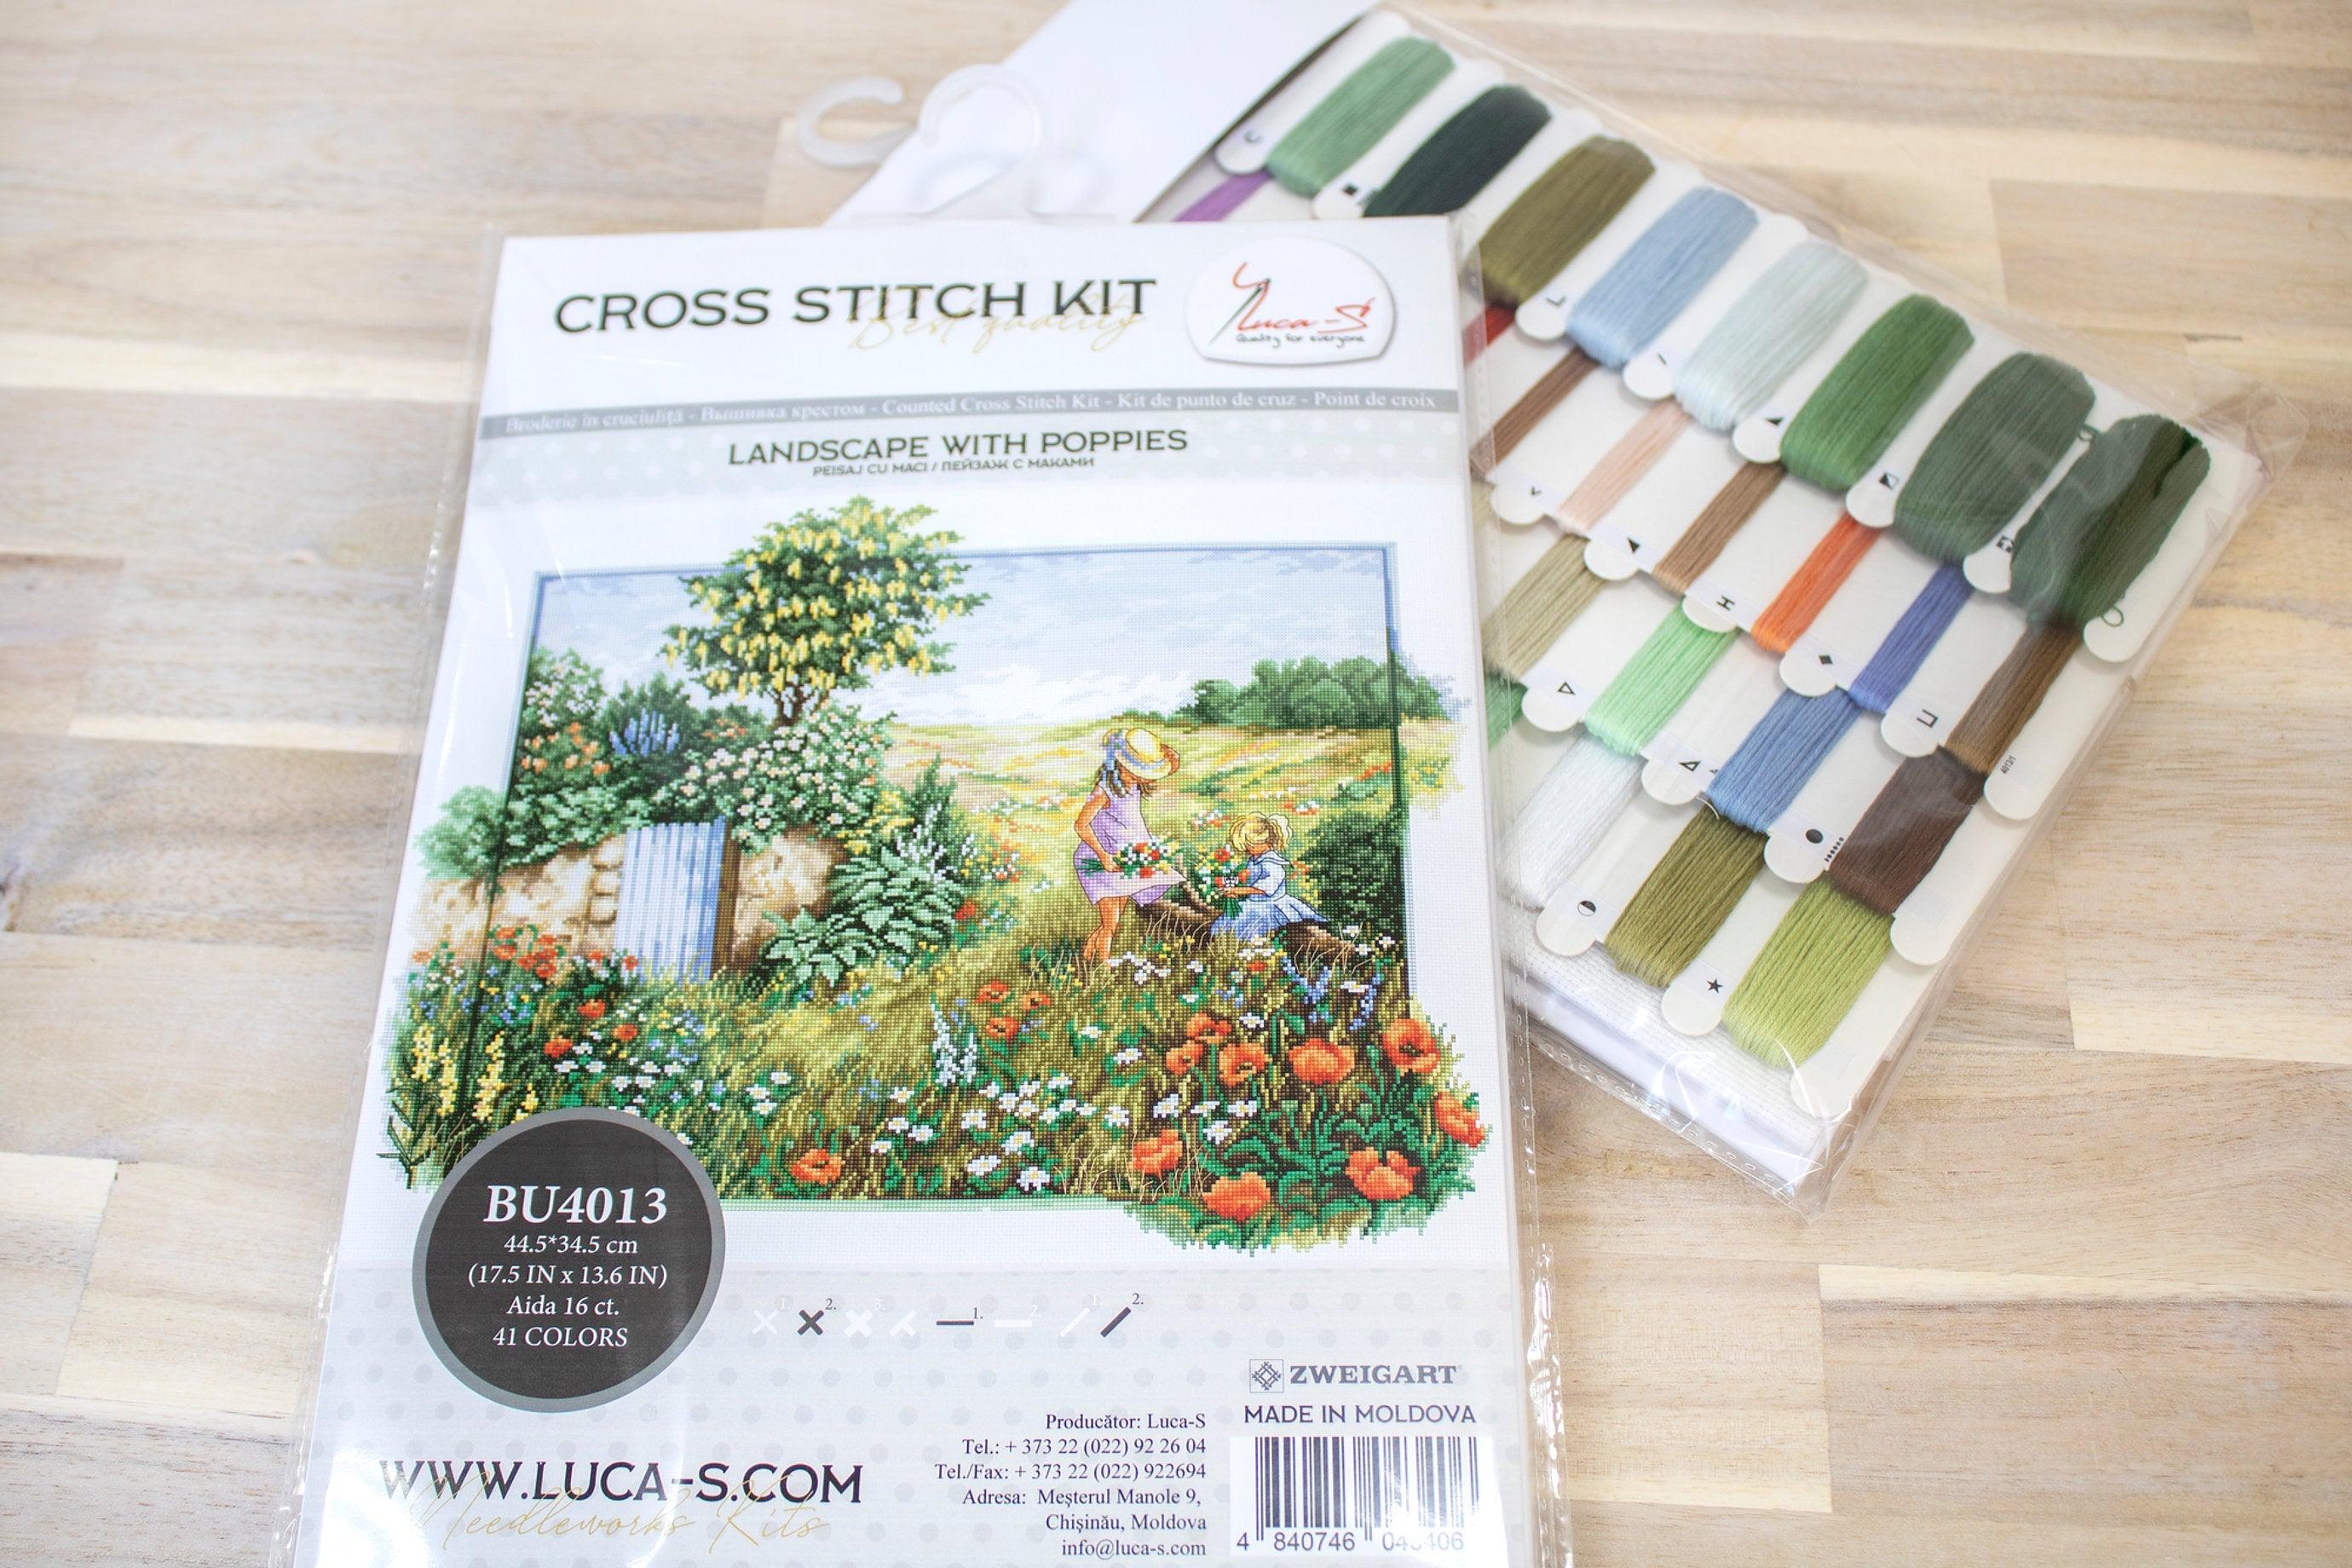 Cross Stitch Kit Luca-S - Landscape with poppies, BU4013 - Luca-S Cross Stitch Kits